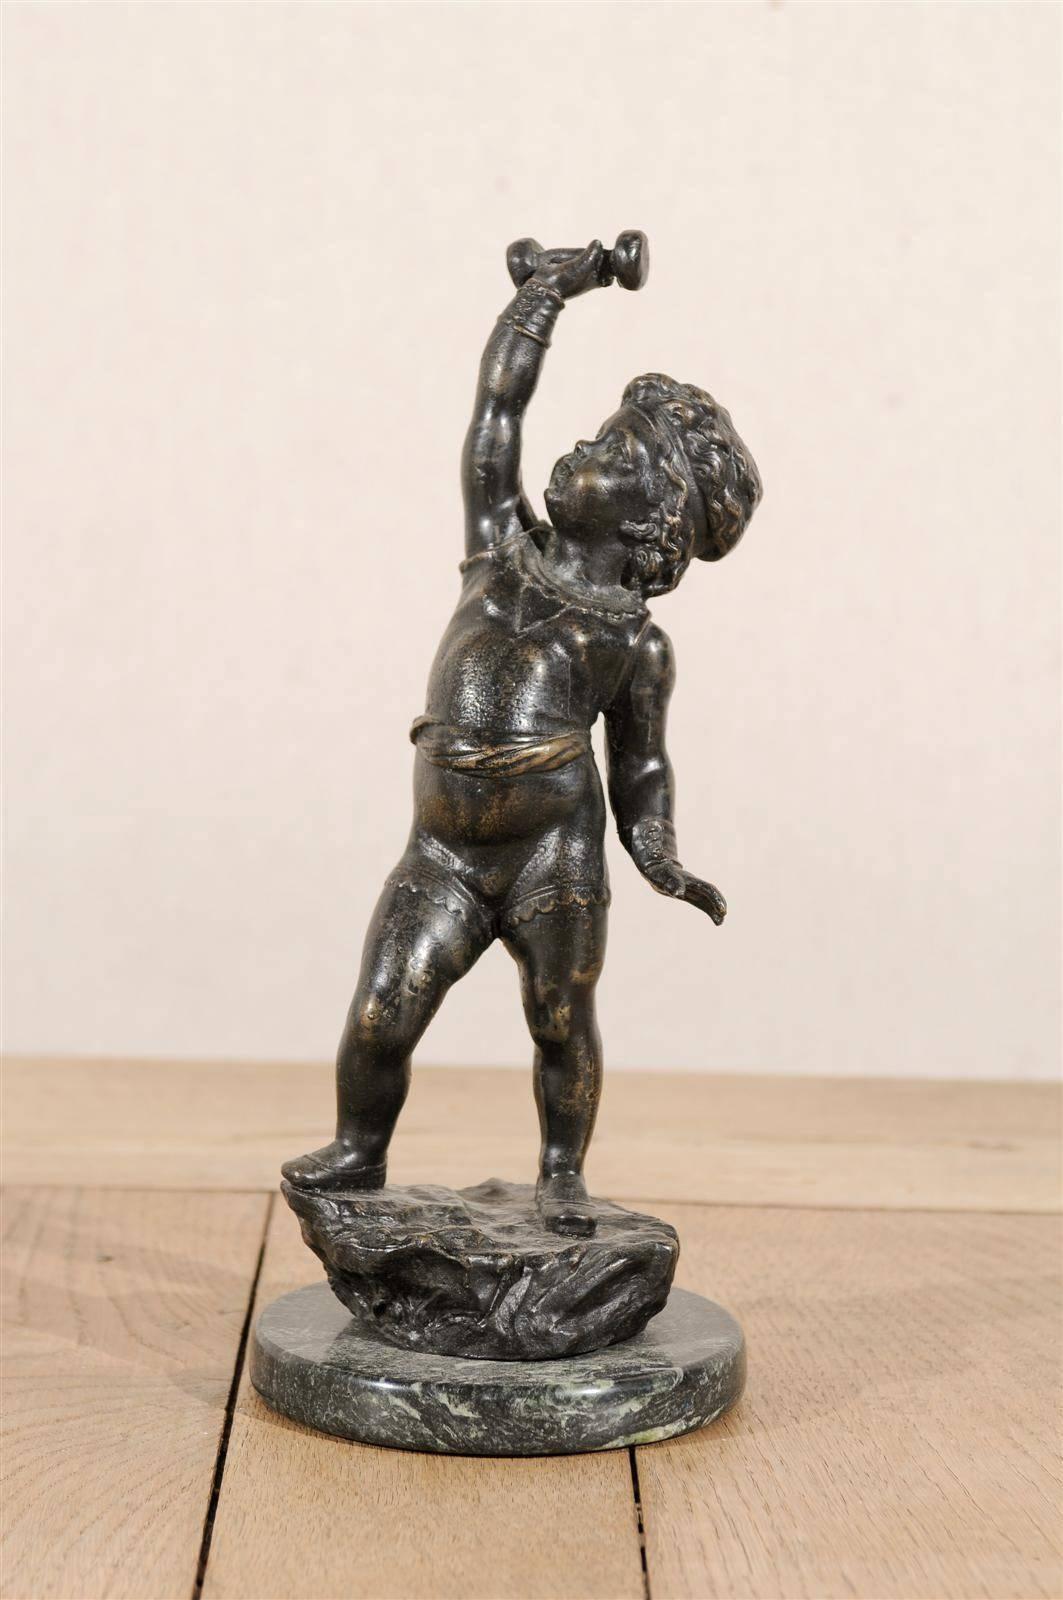 An Italian small size bronze sculpture of a putto on marble base, reproduction of a Classical statue. Mid-20th century.